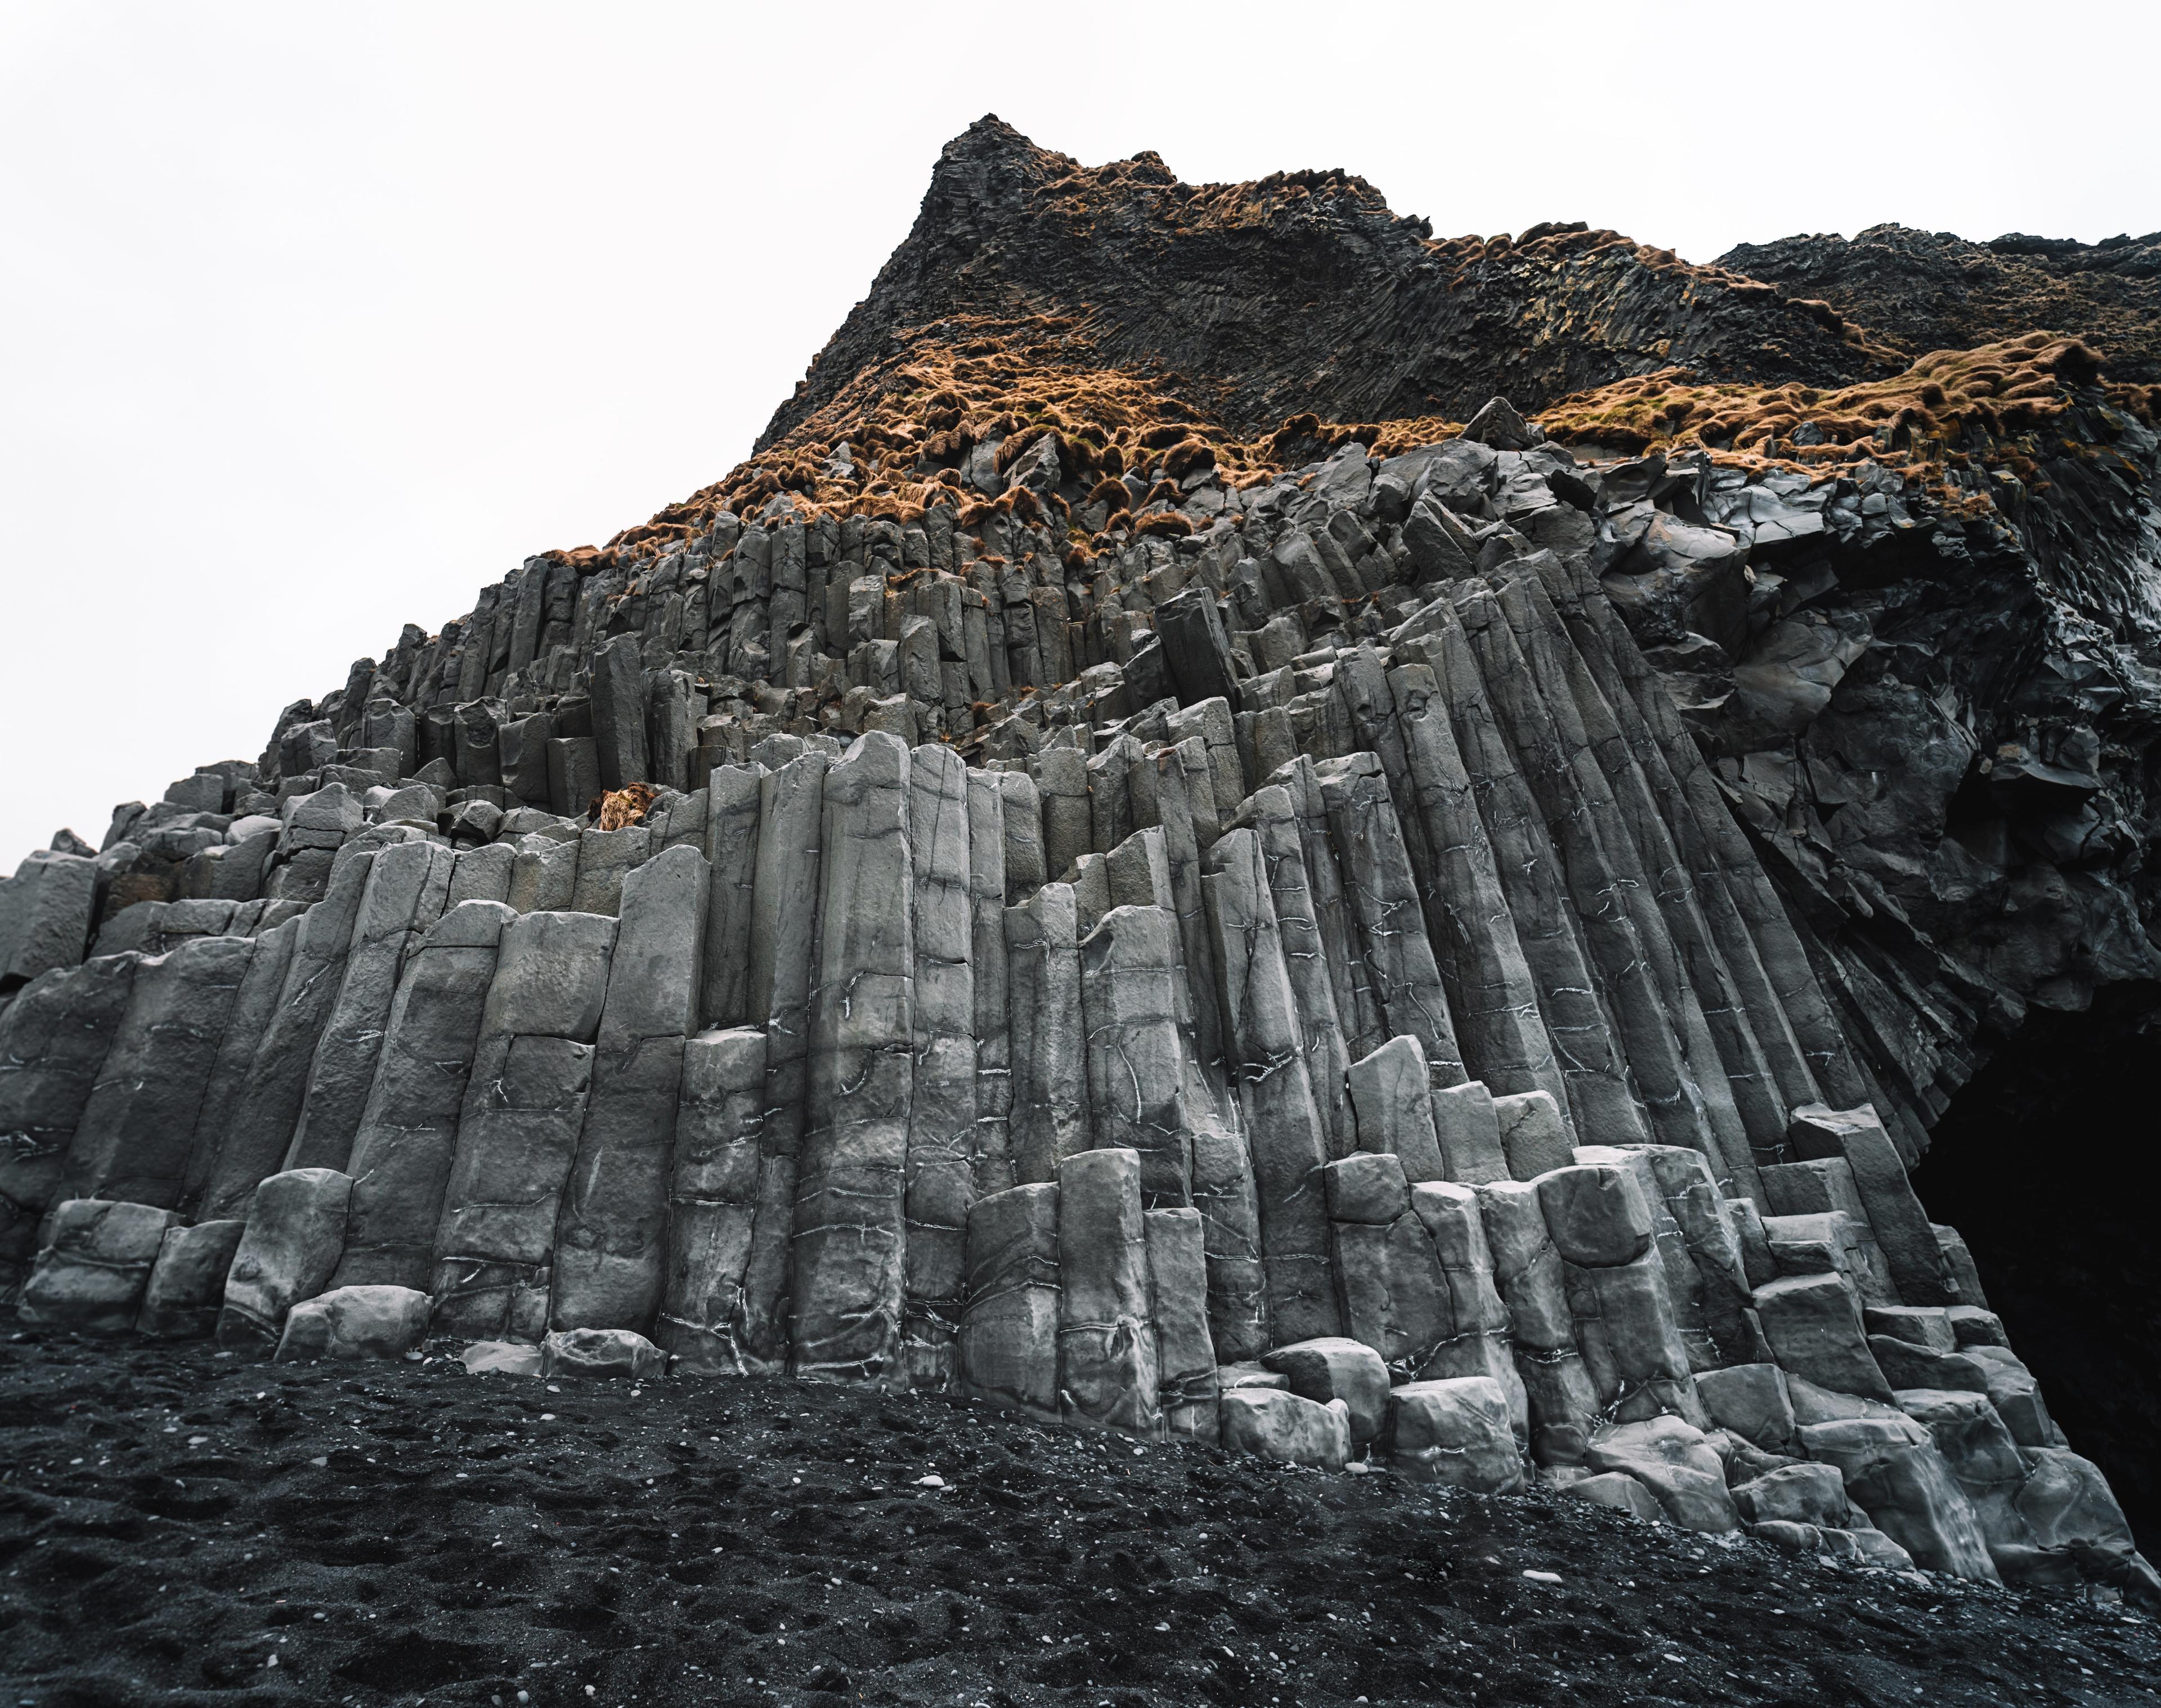 Columnar basalt formations creating a natural wall with a cave at the base, against a black sand beach.